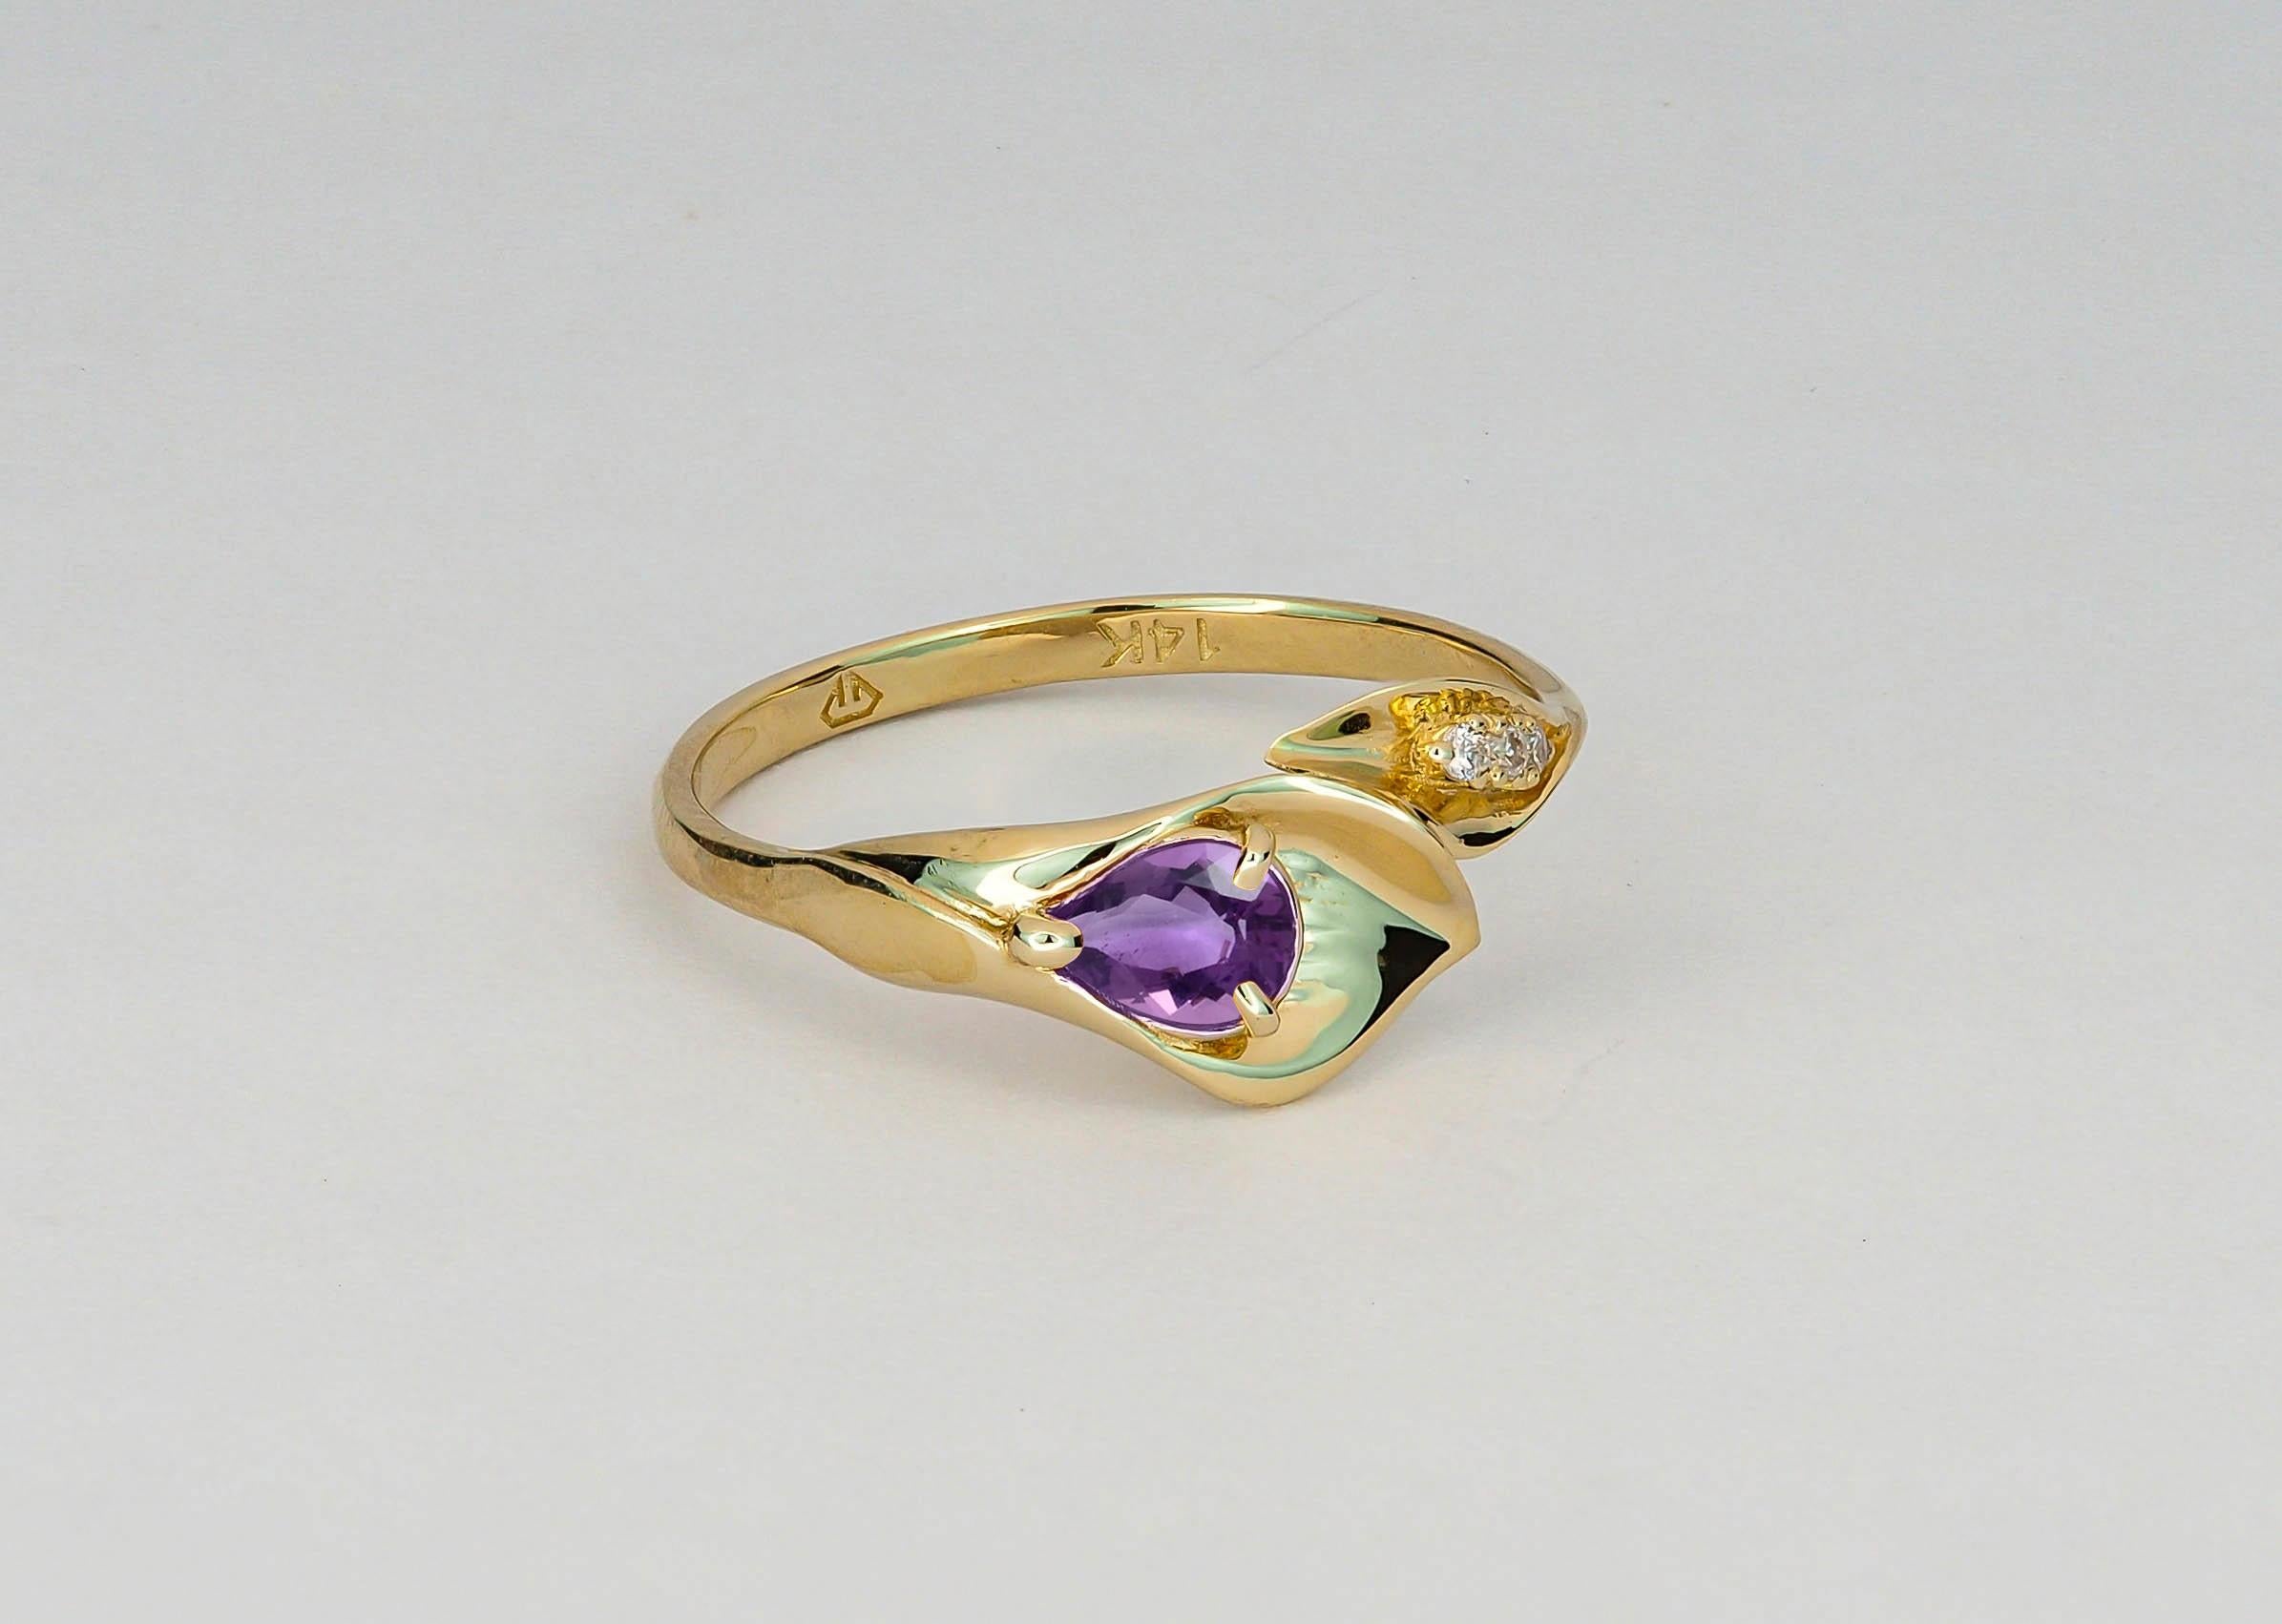 Lily calla gold ring. 14 kt  gold ring with amethyst and diamonds. Pear amethyst gold ring. Flower gold ring.
Genuine amethyst ring. Purple amethyst ring. Amethyst vintage ring. Delicate amethyst ring. 
Amethyst ring for woman. Natural amethyst